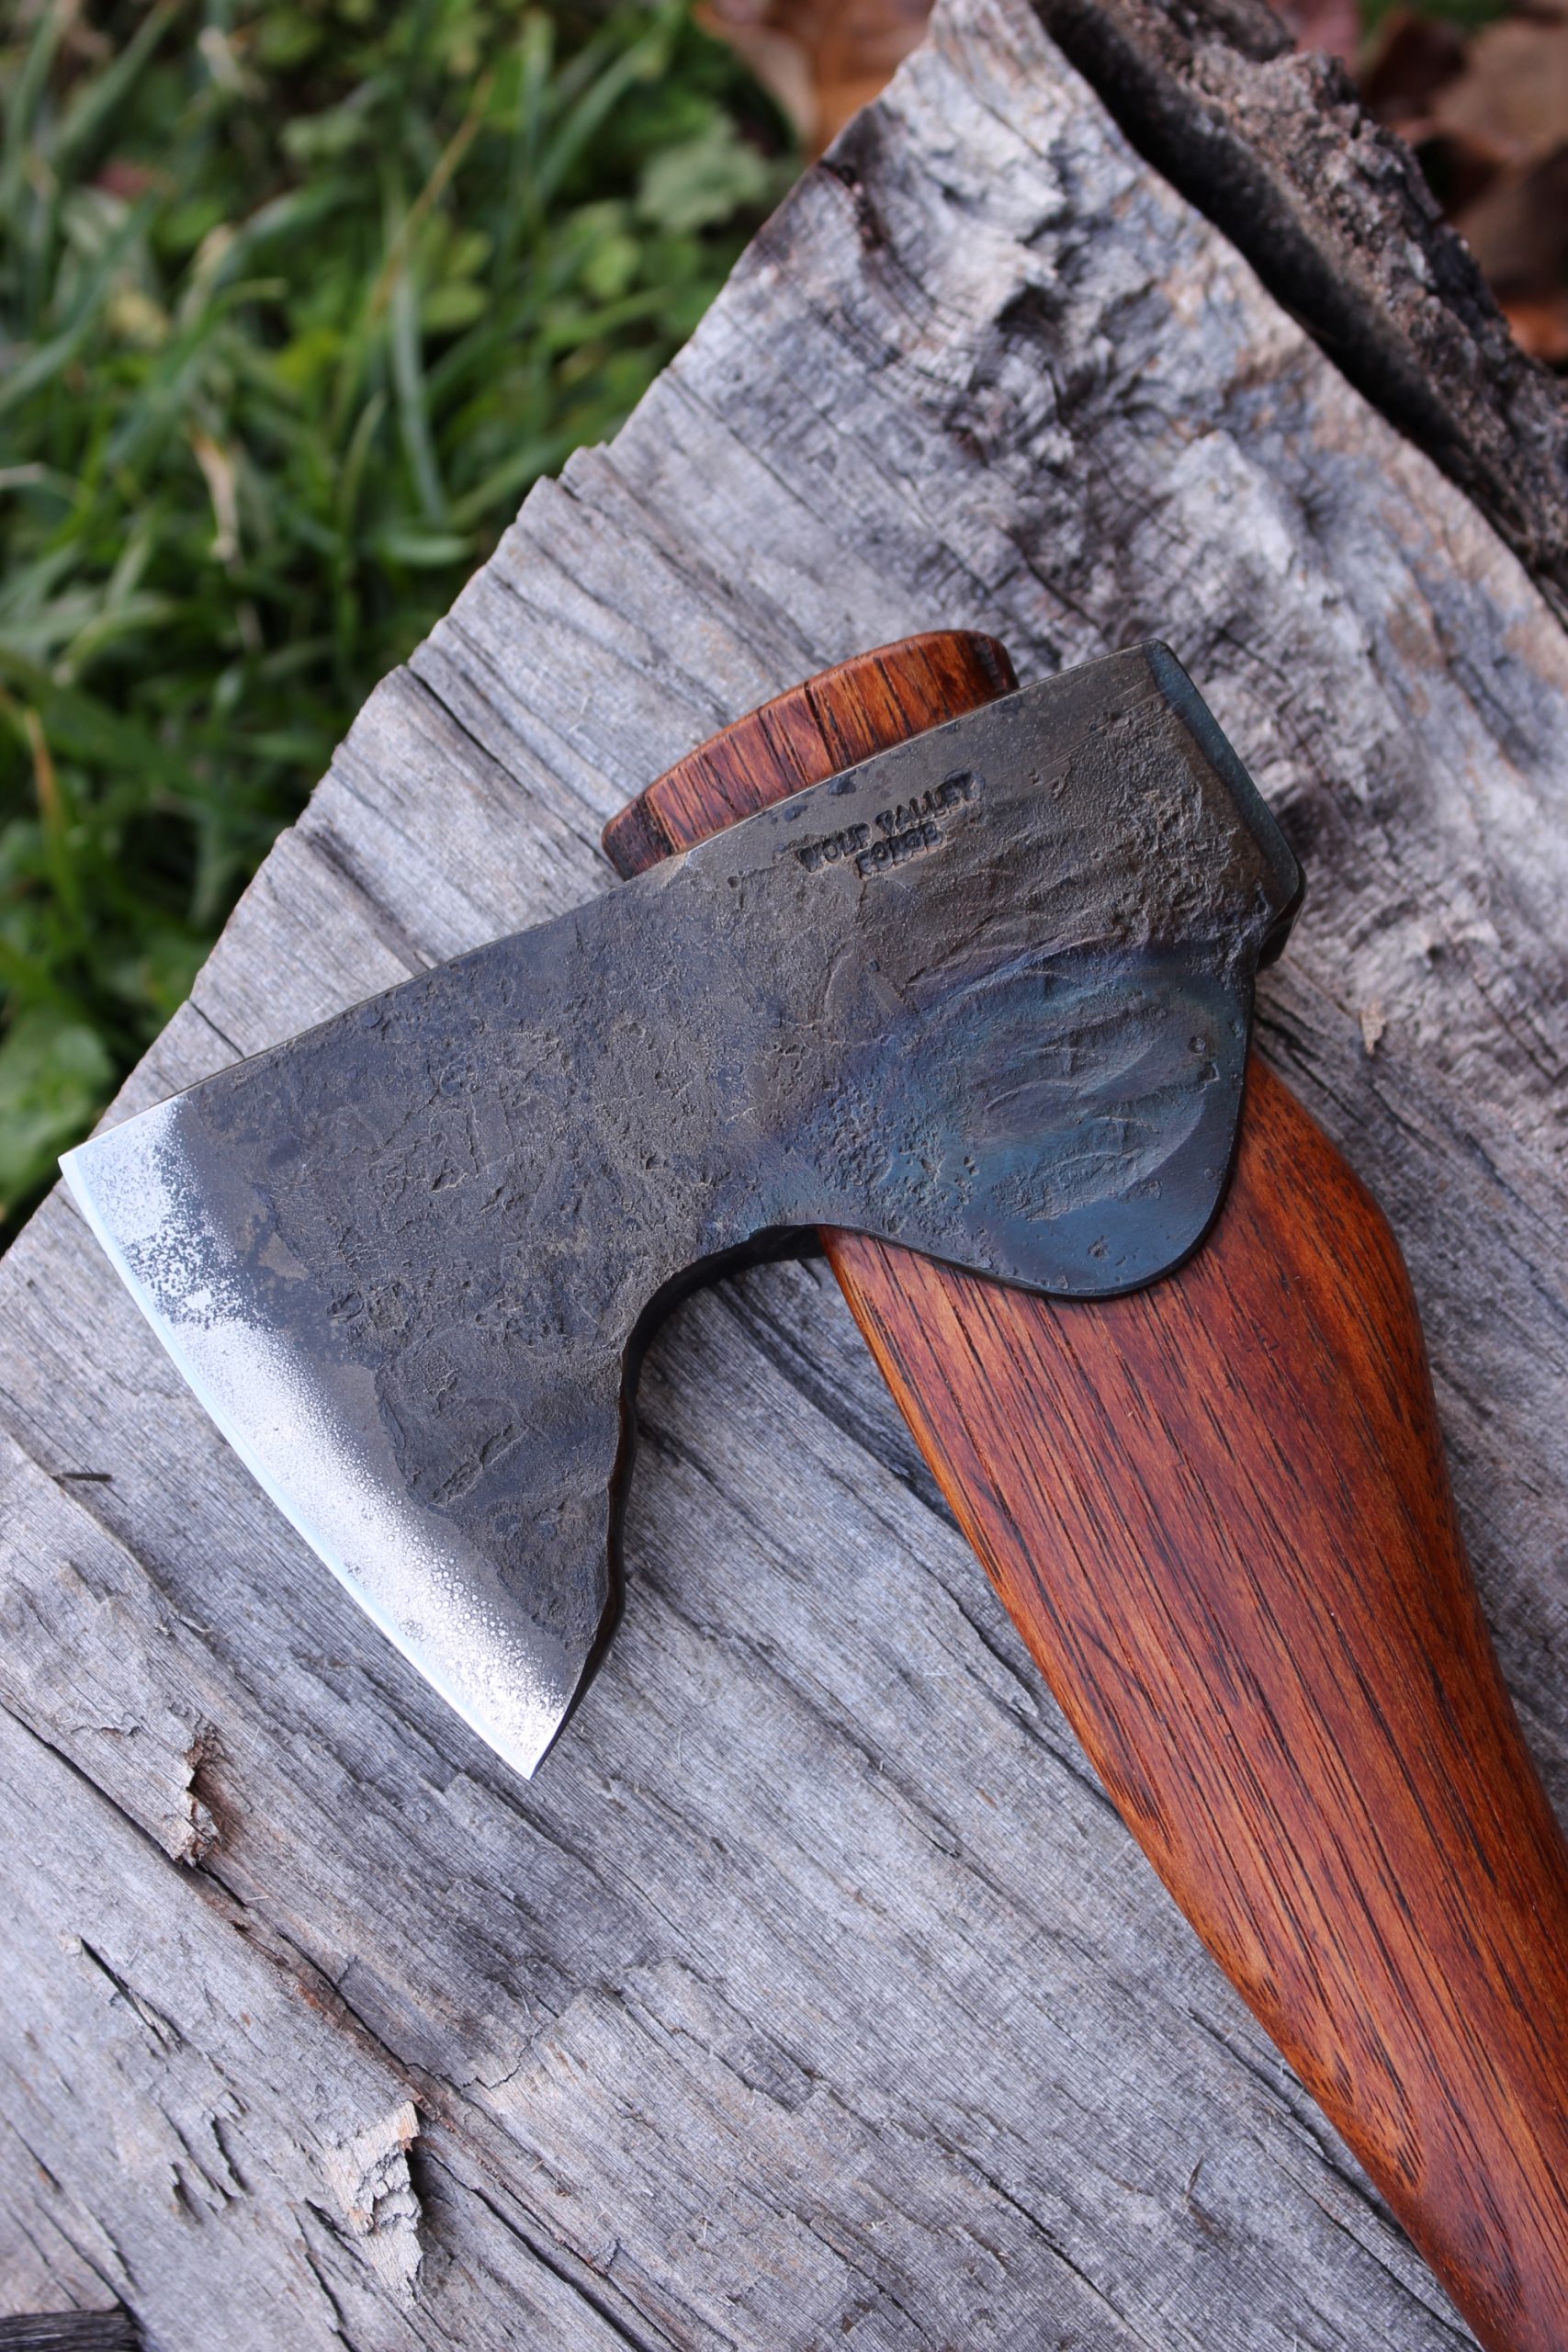 handmade, usa made, usa made axe, hatchet, chopping, wood chopping, outdoor, outdoorsman, survival, backwoodsman, hickory, axe made in america, axes made in the usa, ike bullington, wolf valley forge, valley forge, pack axe, back packing, camping, trail axe, hunting axe, trappers axe, camp axe, bush axe, belt axe, pack axe, leather shoulder rig, chopping axe, leather axe carrier, shoulder sling for axe, carpenter's axe, Wolf Valley Forge, Wolf Valley Forge axe release, Axe Wax, haversack, go back, man purse, man bag, canvas bag, reenactor, reenacting, Trekker Axe